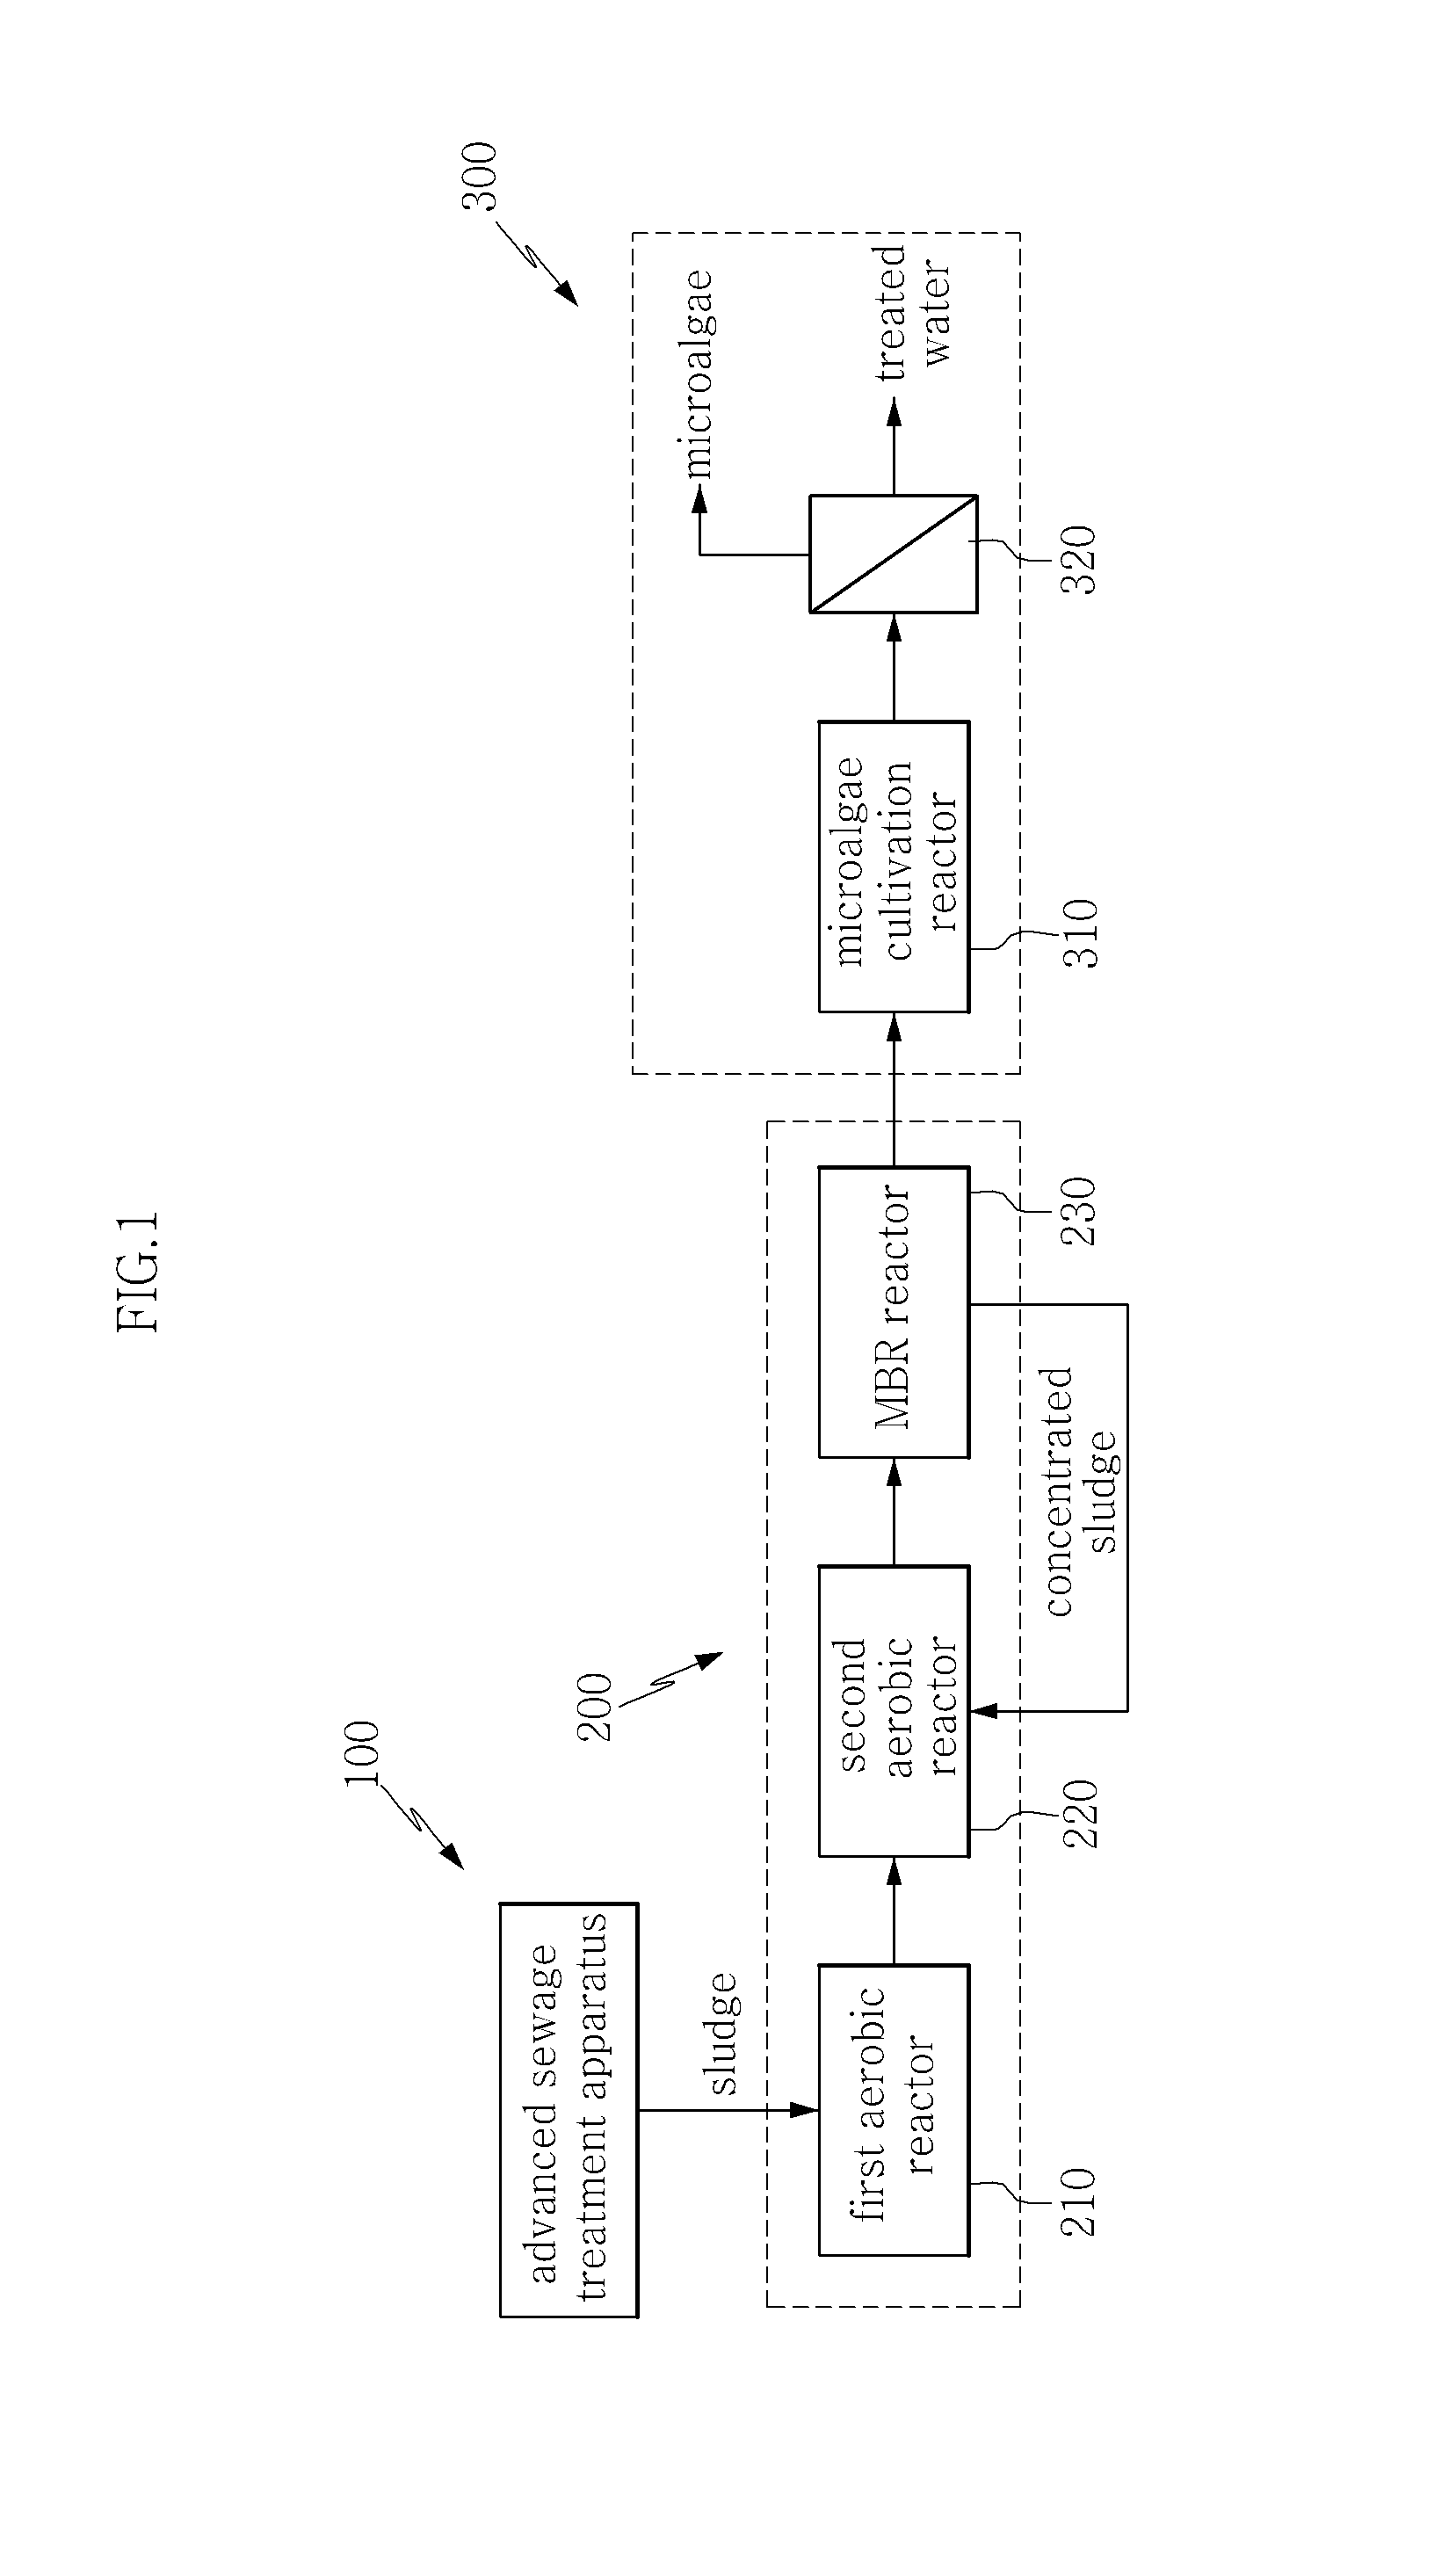 Apparatus and method for cultivating microalgae using effluent from sludge treatment